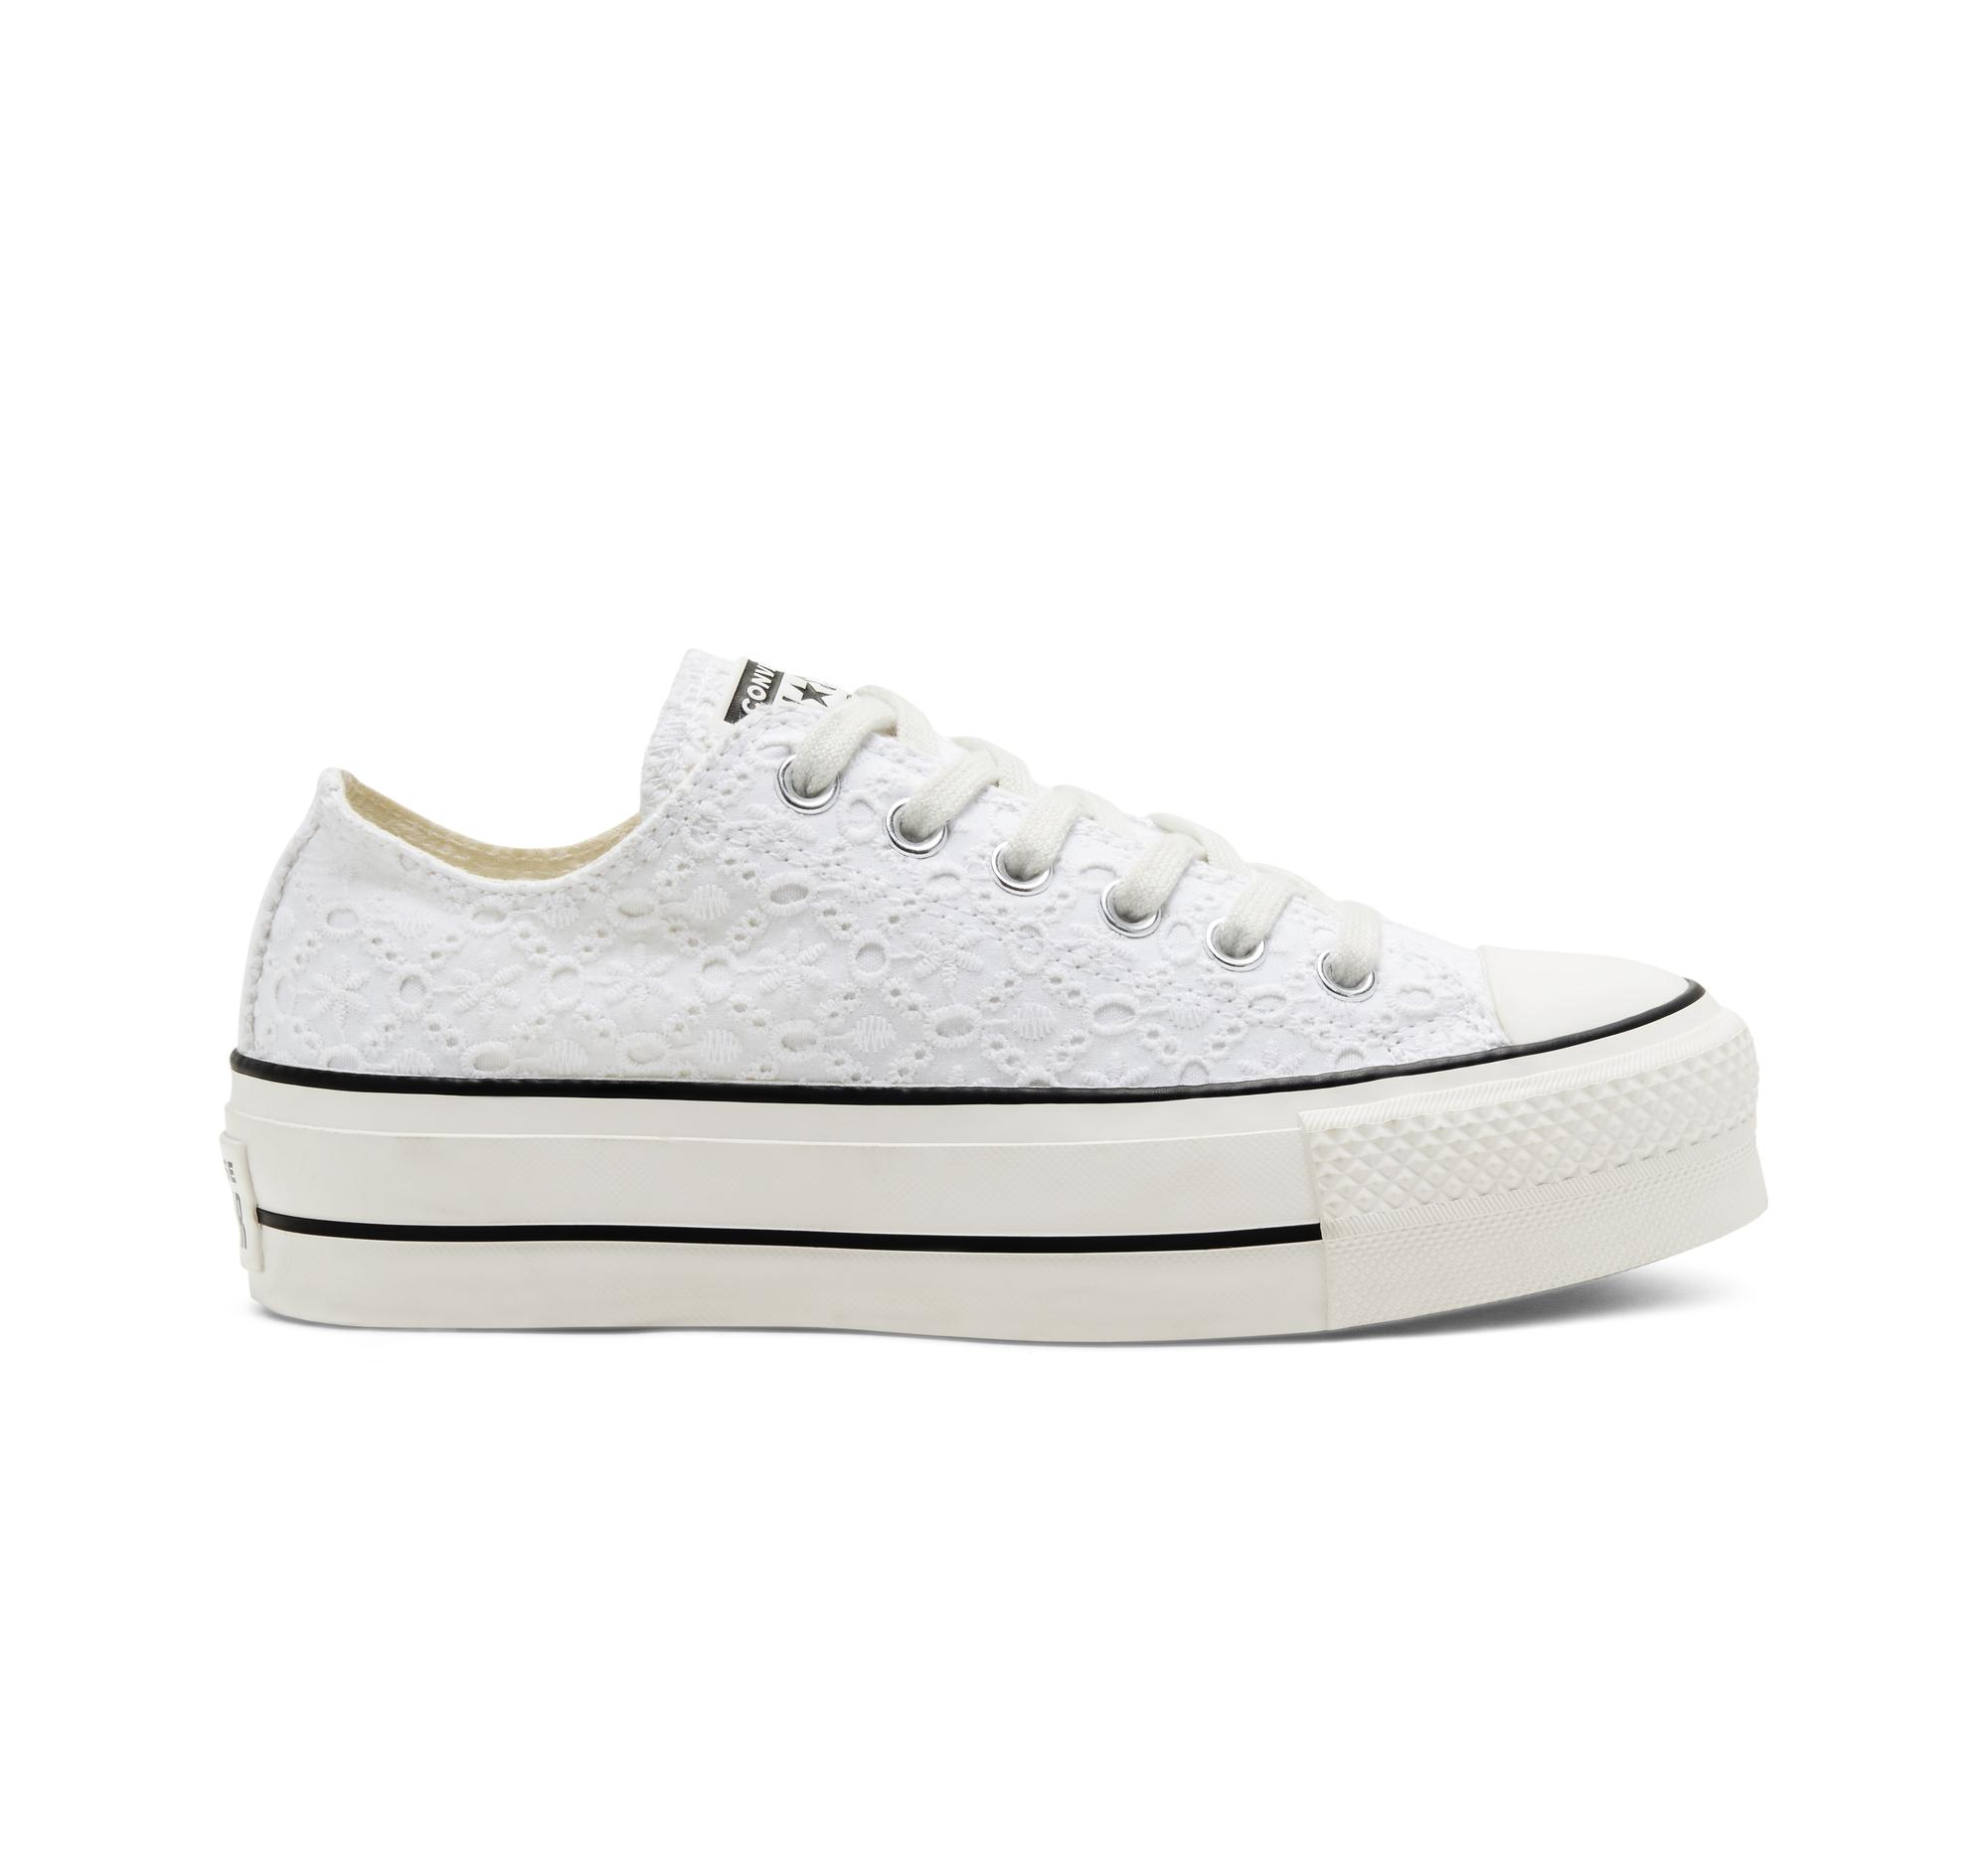 Converse Cotton Boho Mix Platform Chuck Taylor All Star in White - Lyst